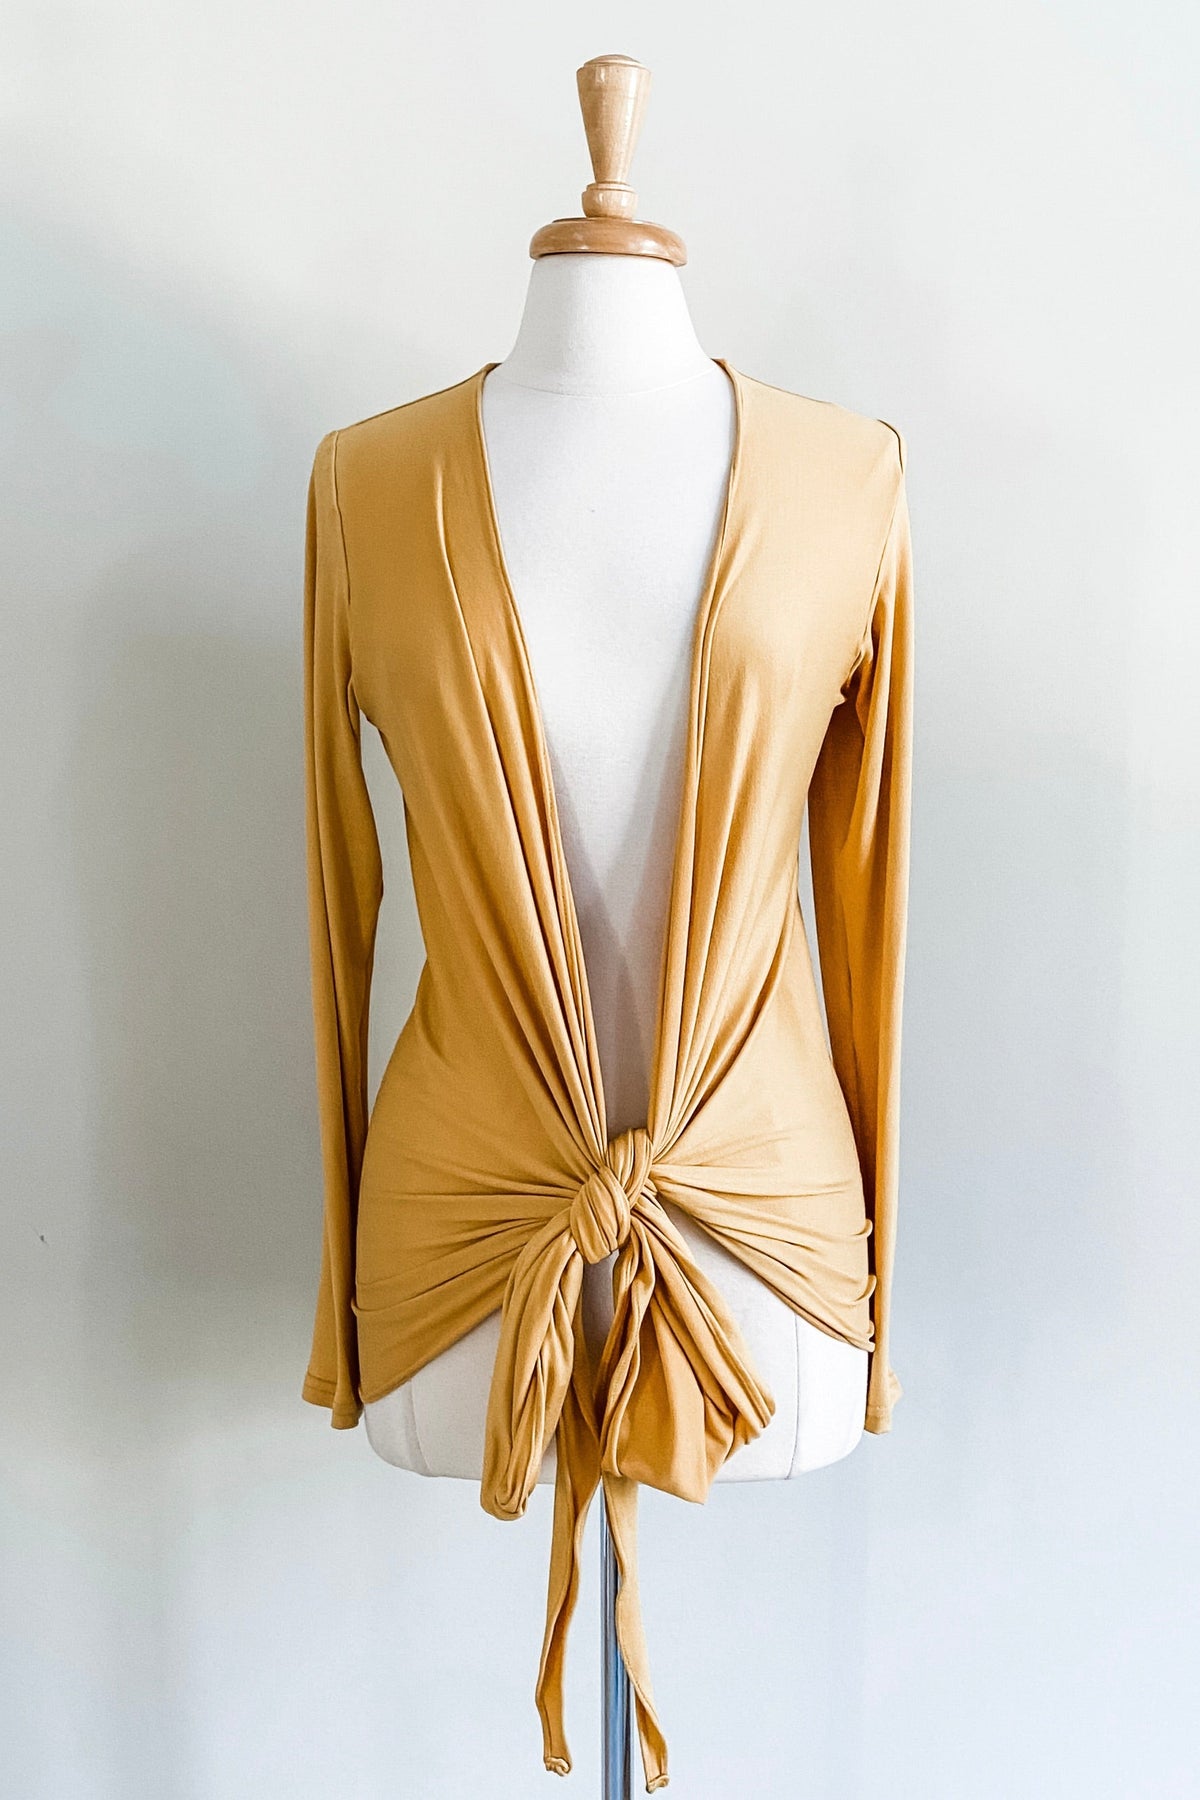 Diane Kroe Wrap Top (Yellow) - The Classic Capsule Collection